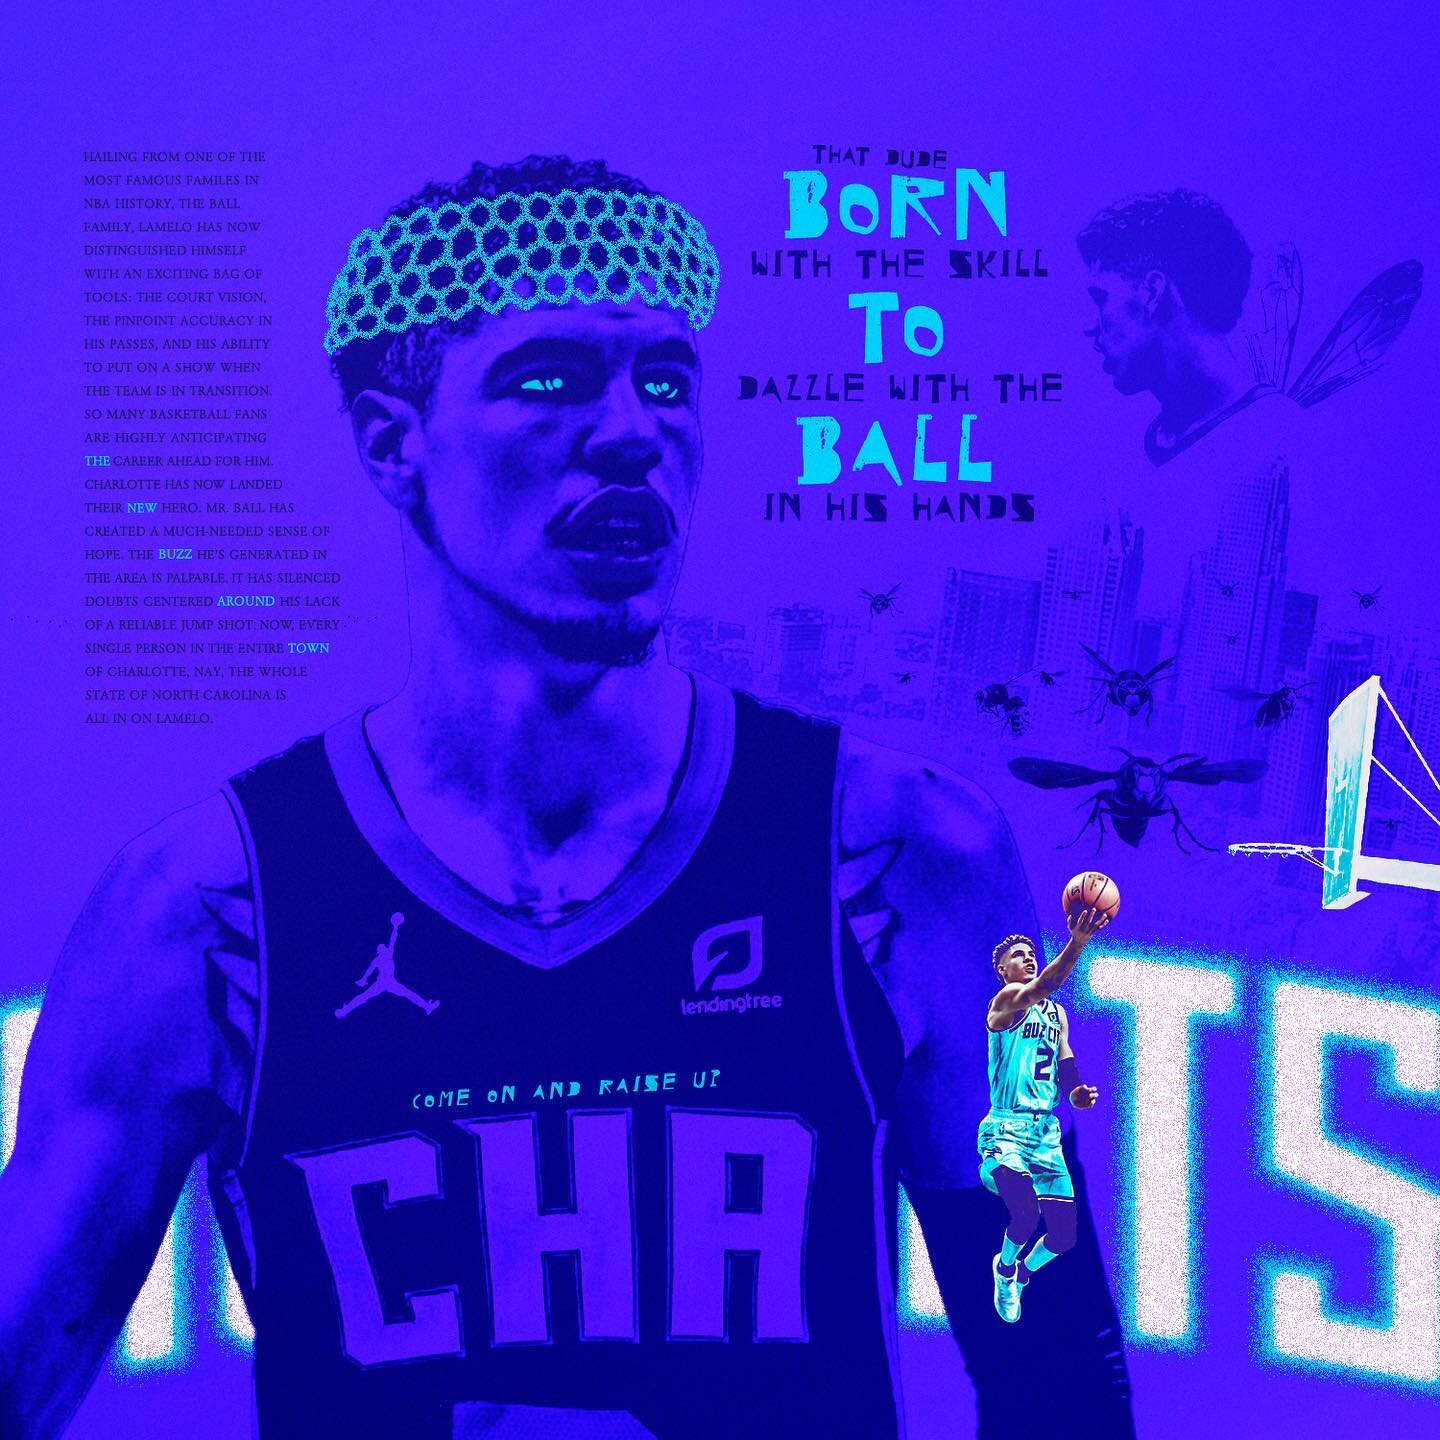 that dude BORN with the skill TO dazzle with the BALL in his hands! 

The name&rsquo;s Lamelo Ball, you lames!

____

____

____

#hornets #charlotte #charlottehornets #nbaart #nbaartwork #basketballedits #basketballart #sportsdesign #nbadesign #lame